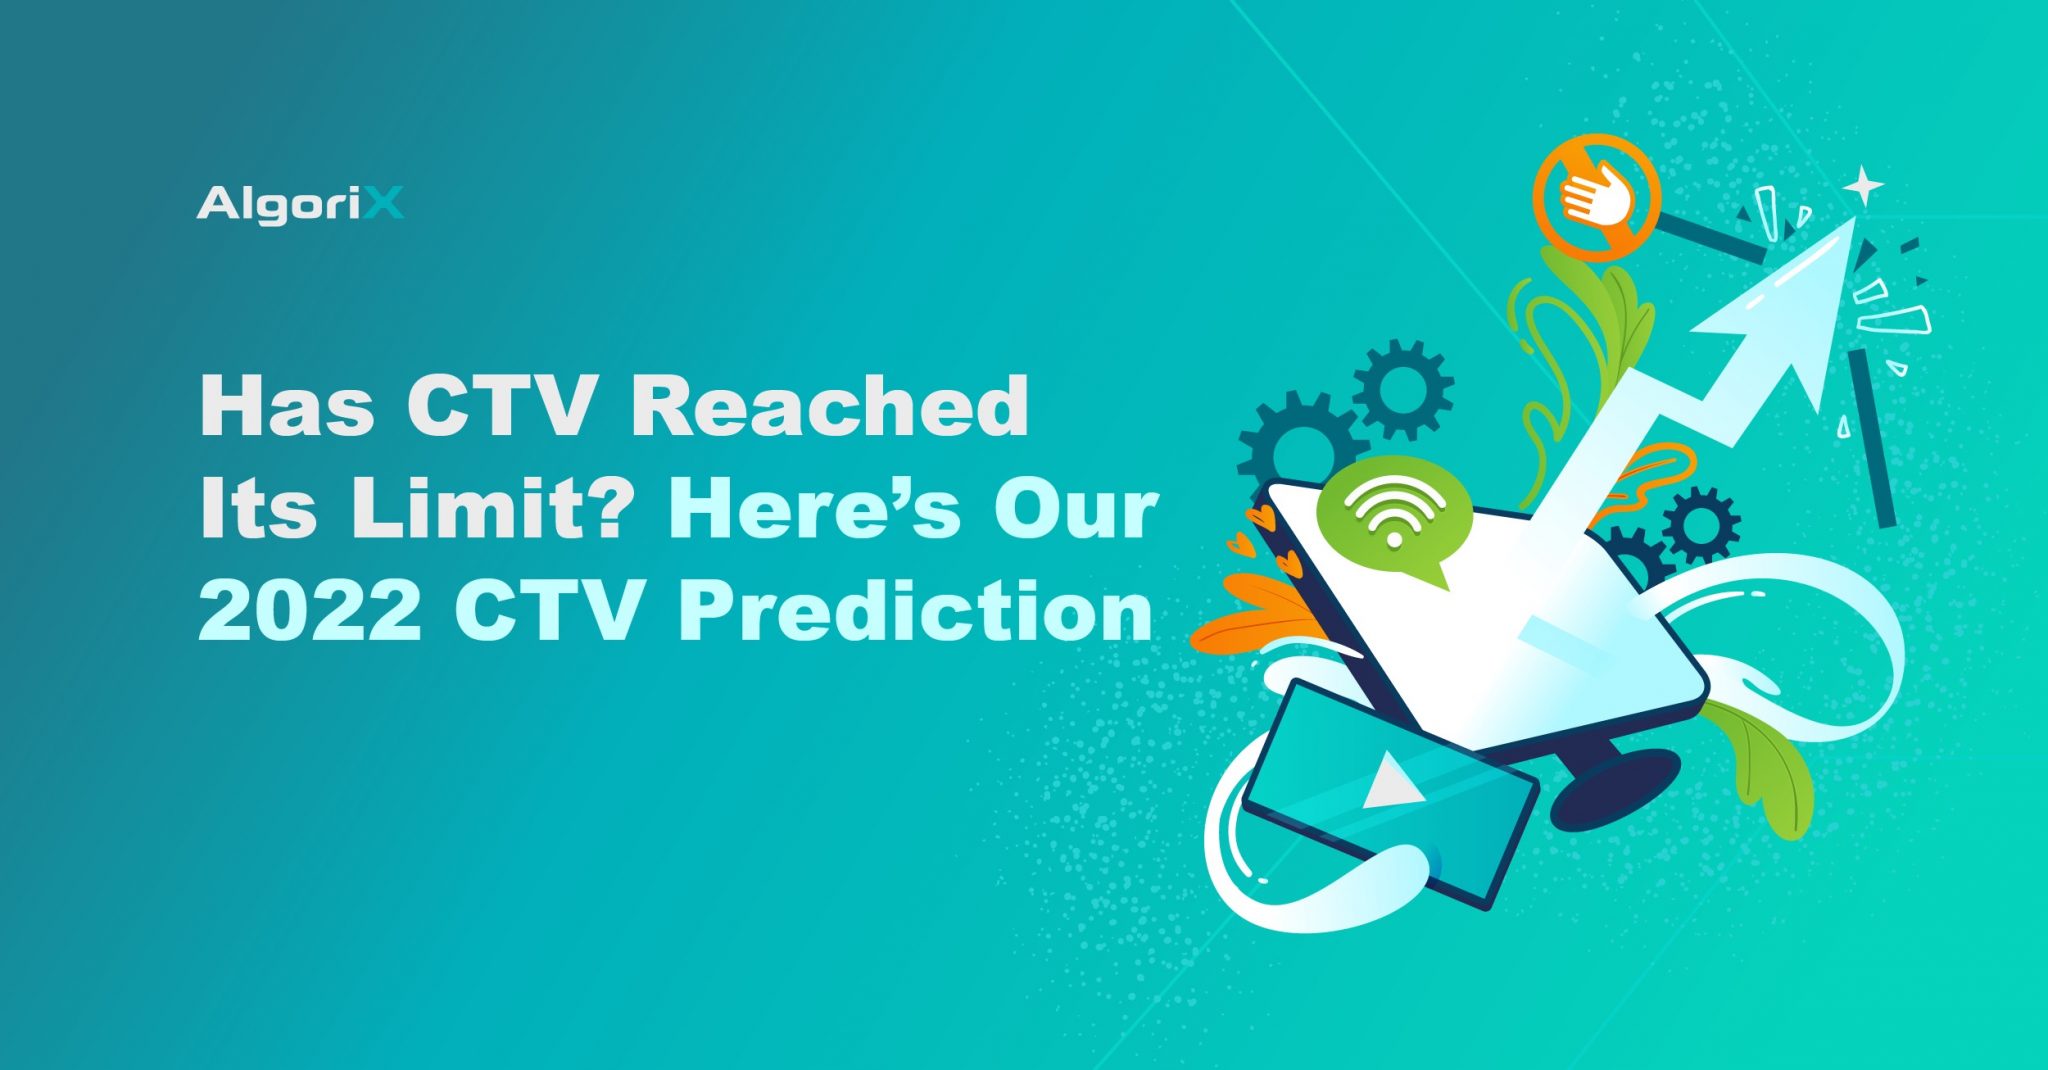 Has CTV Reached Its Limit? Here’s Our 2022 CTV Prediction